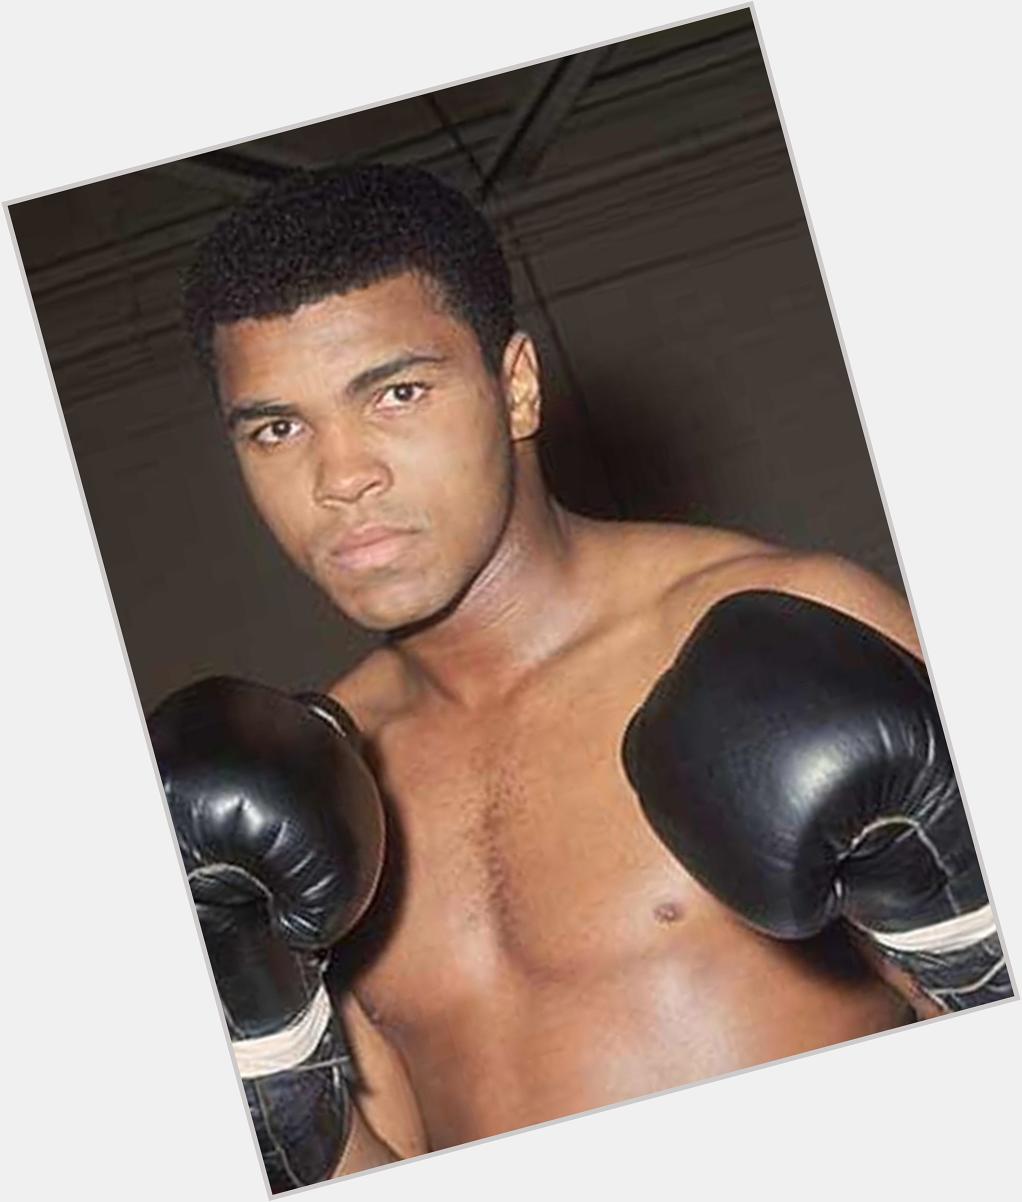 Happy Birthday MUHAMMAD ALI 17-1-42 he\s 73 today,a true Sporting Legend and undoubtably the Greatest boxer ever 